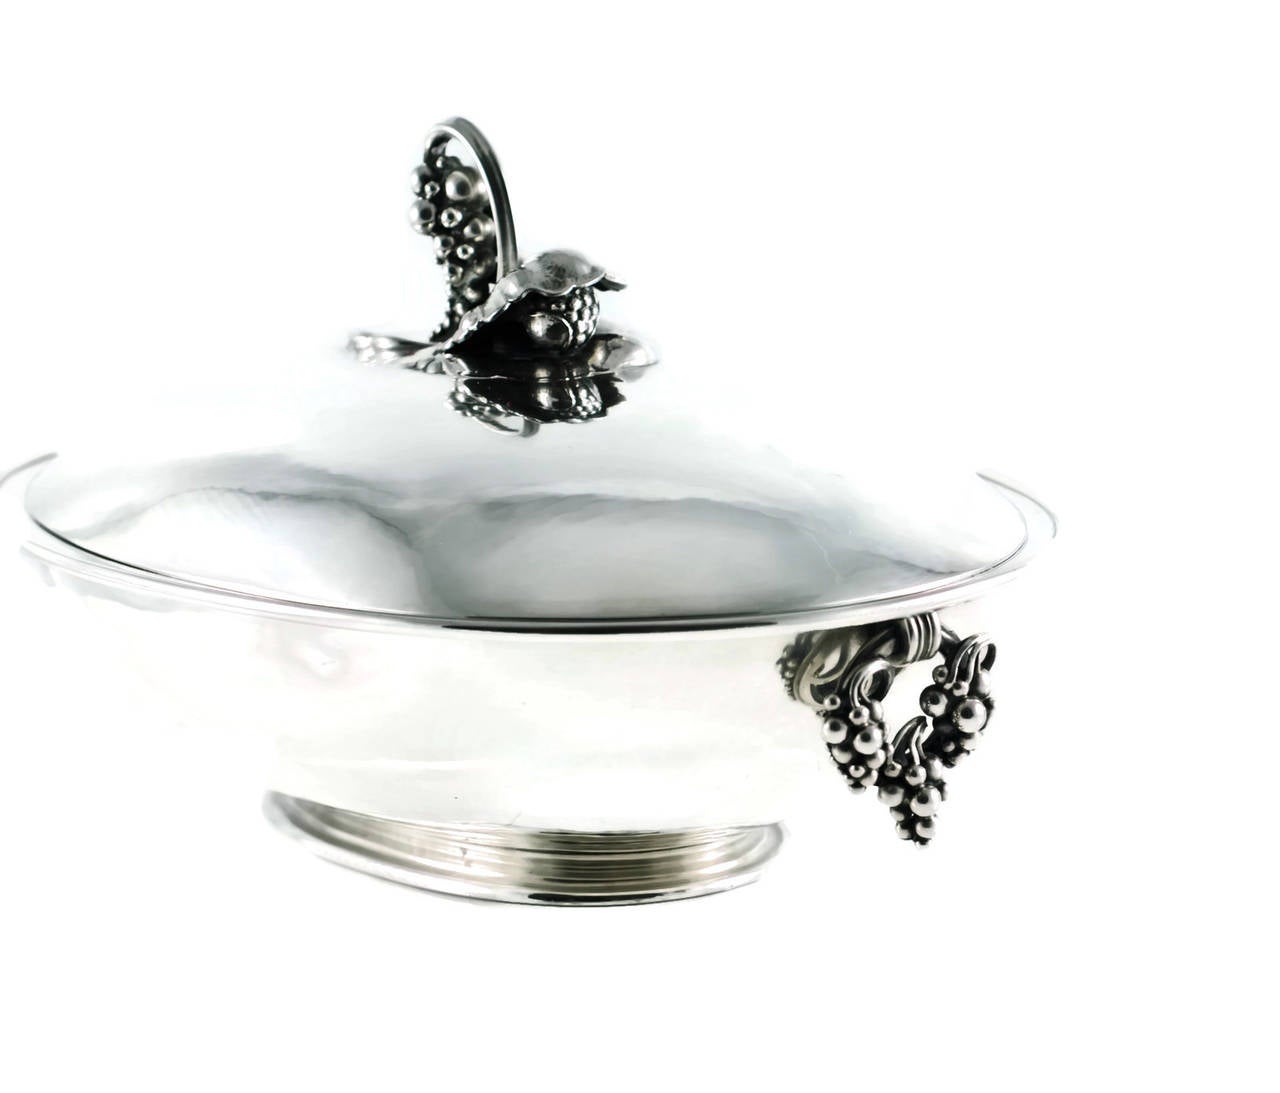 Vintage Georg Jensen sterling silver oval serving dish with cover - grape motif. This fabulous pre 1945 Georg Jensen oval lidded dish is crafted from sterling silver. The hand-hammered dish is a wonderful example of Jensen's iconic Grape Collection,